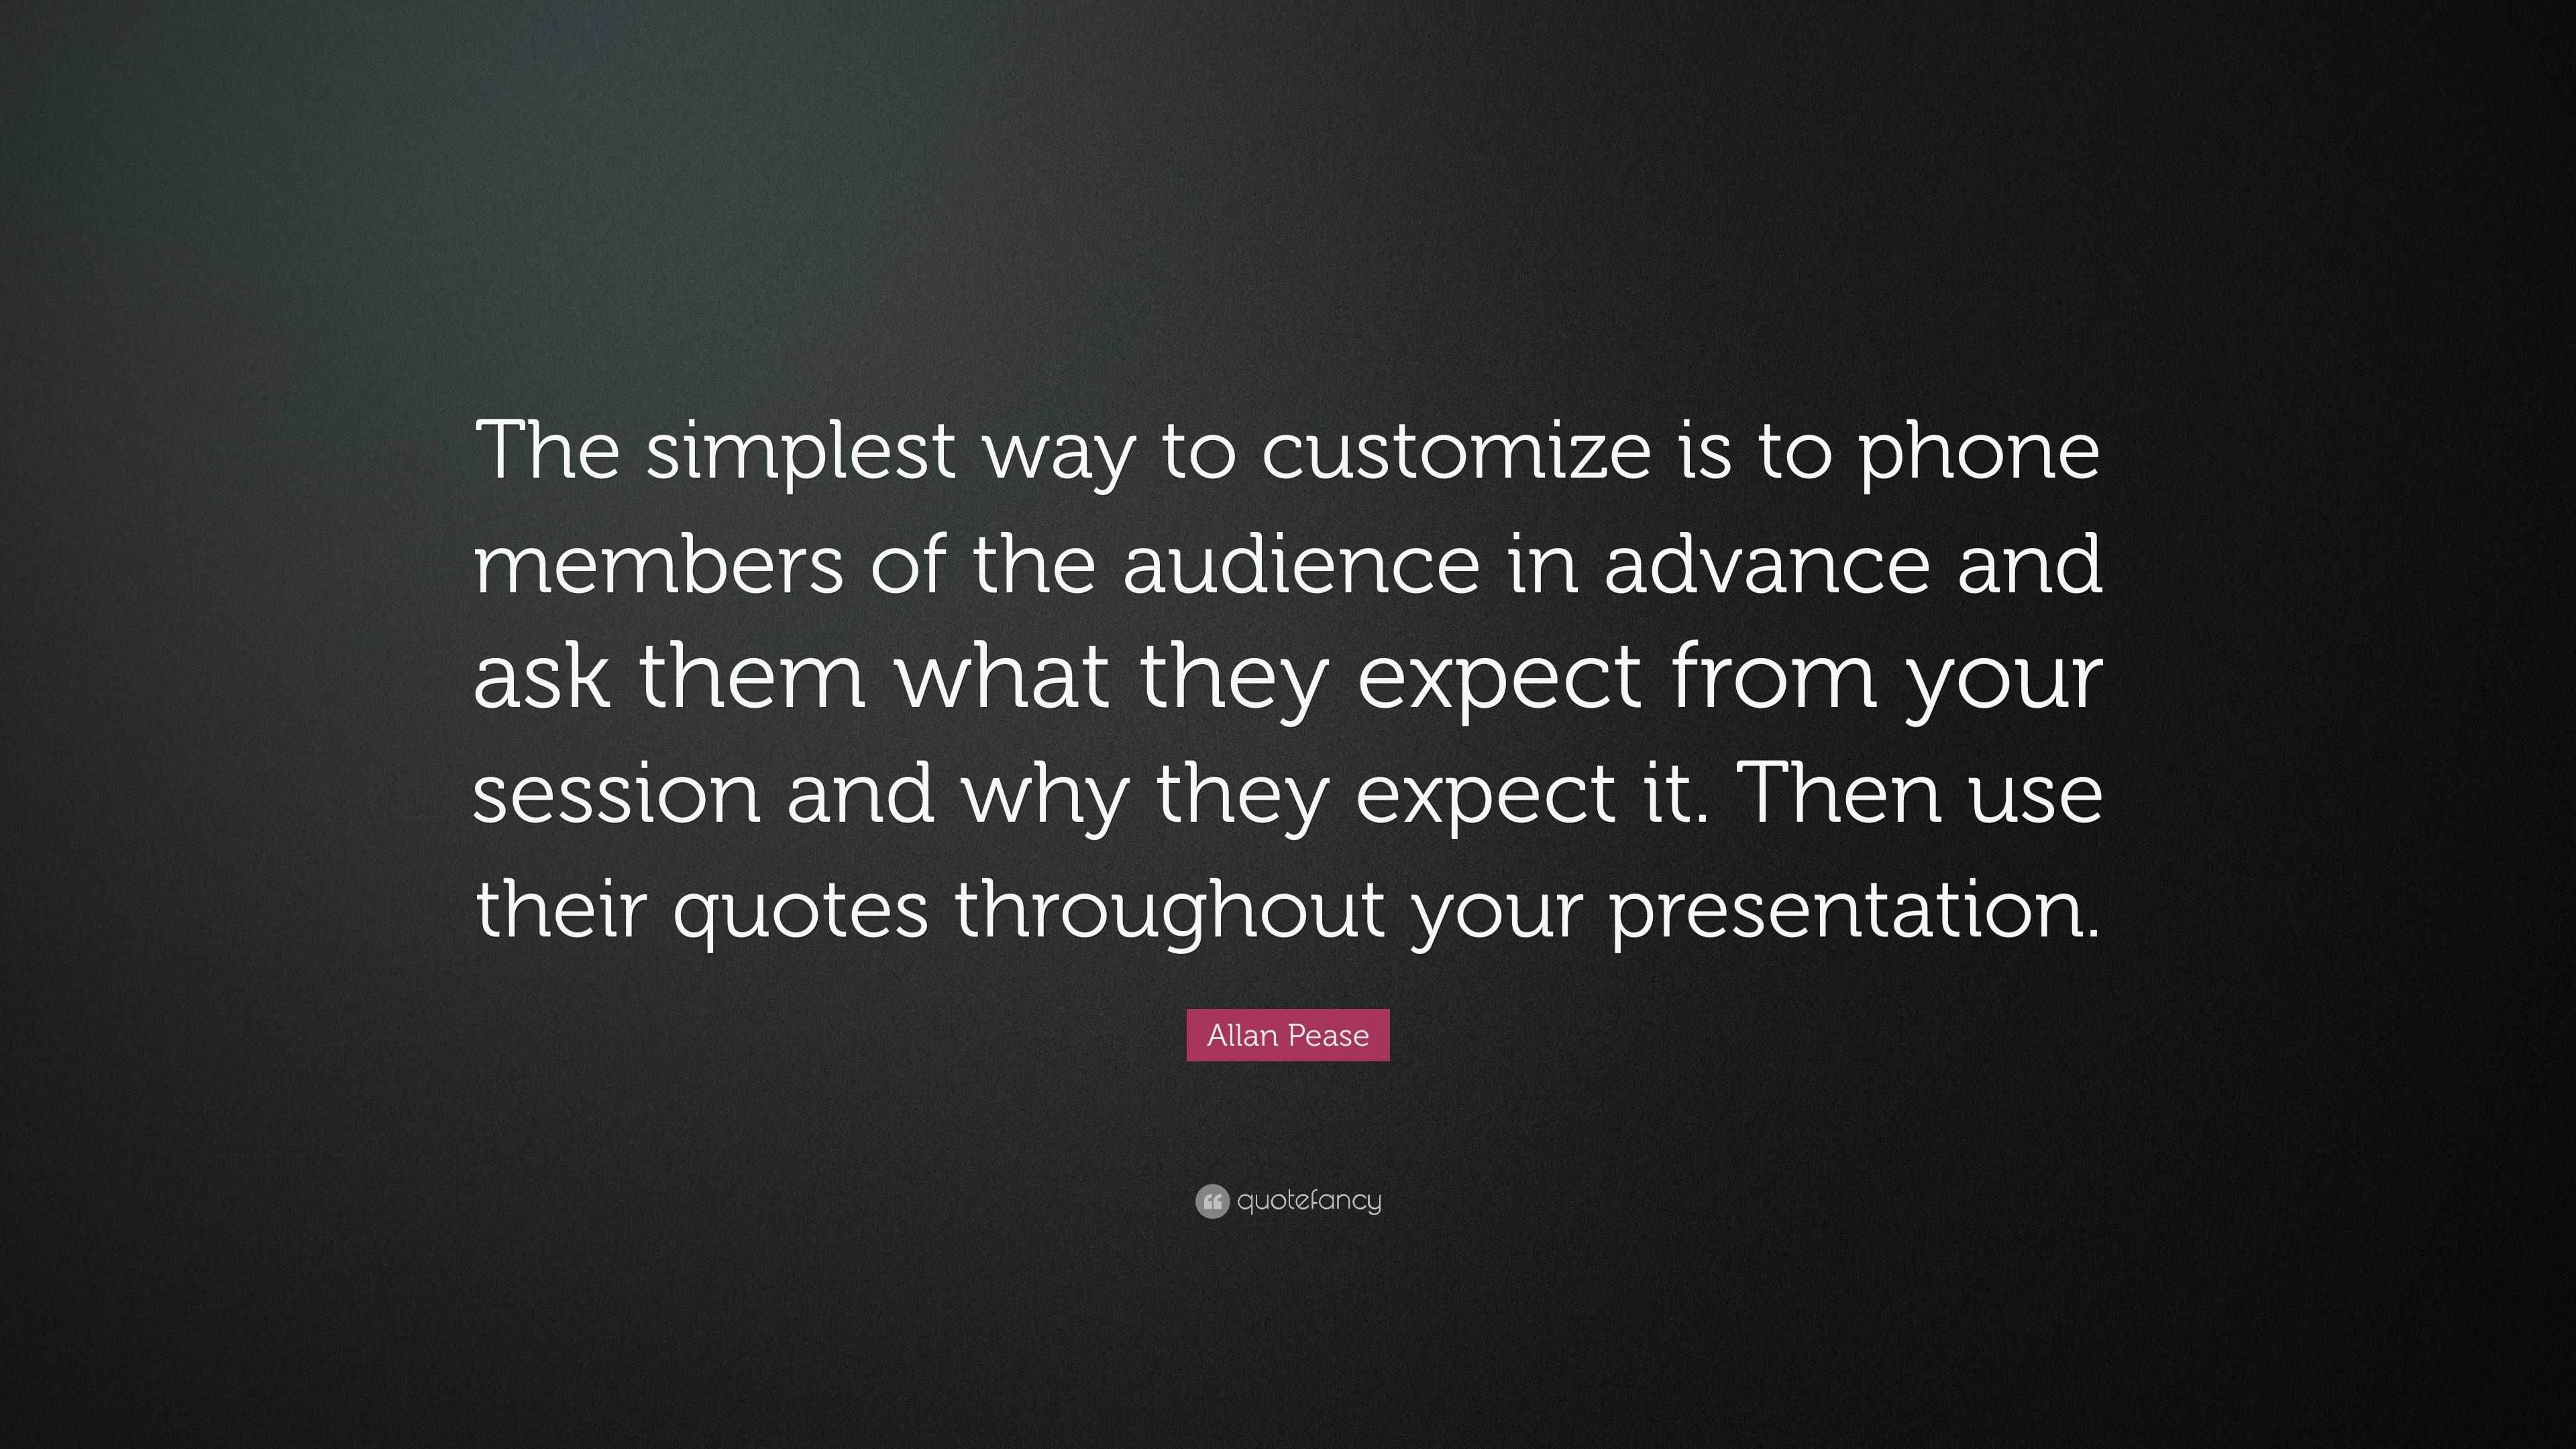 Allan Pease Quote: “The simplest way to customize is to phone members ...